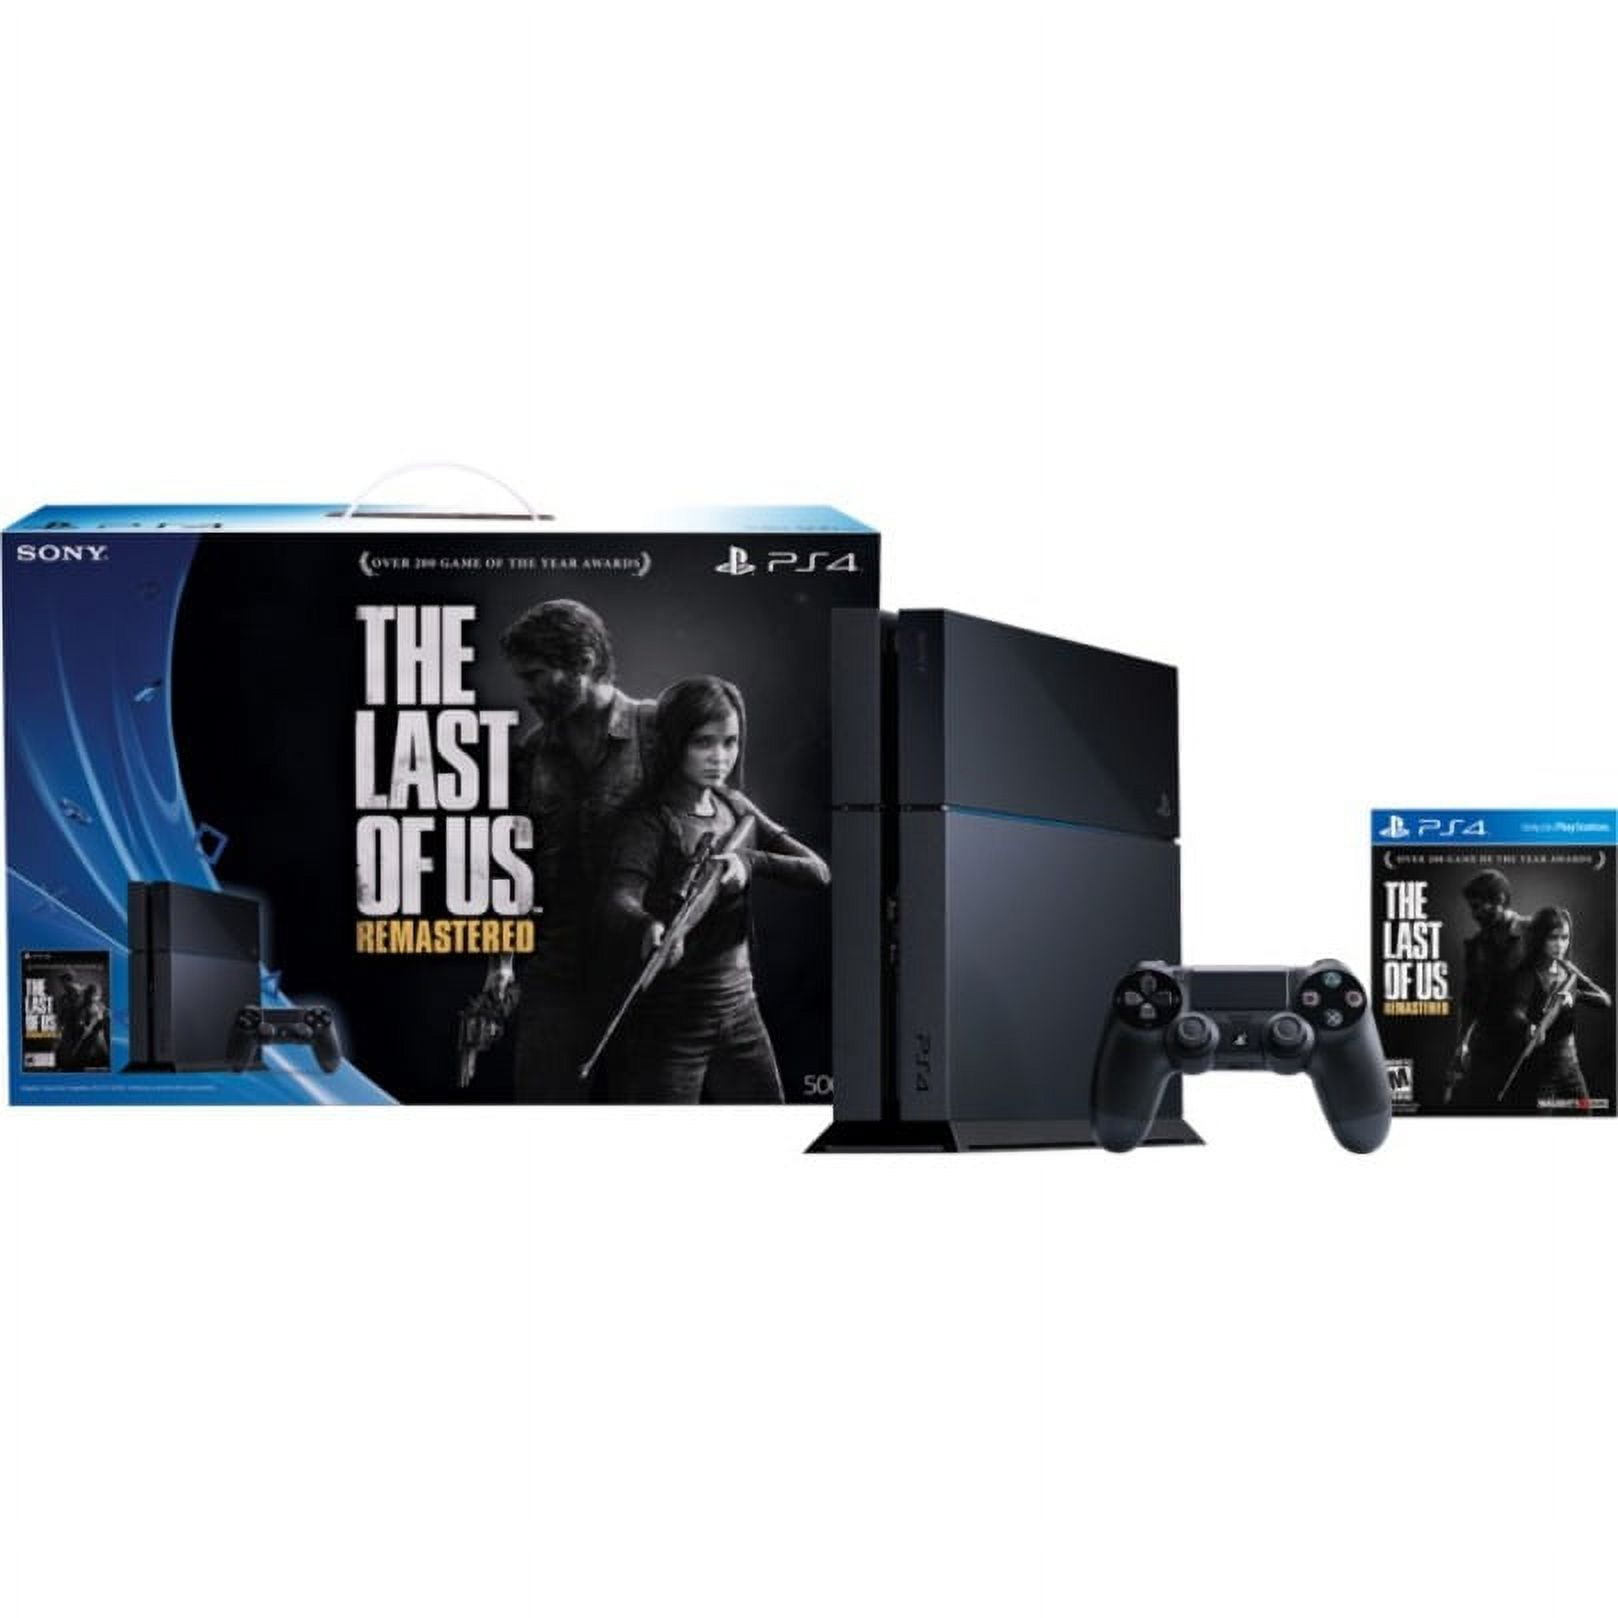 The Last of Us: Remastered is getting its own PS4 console bundle